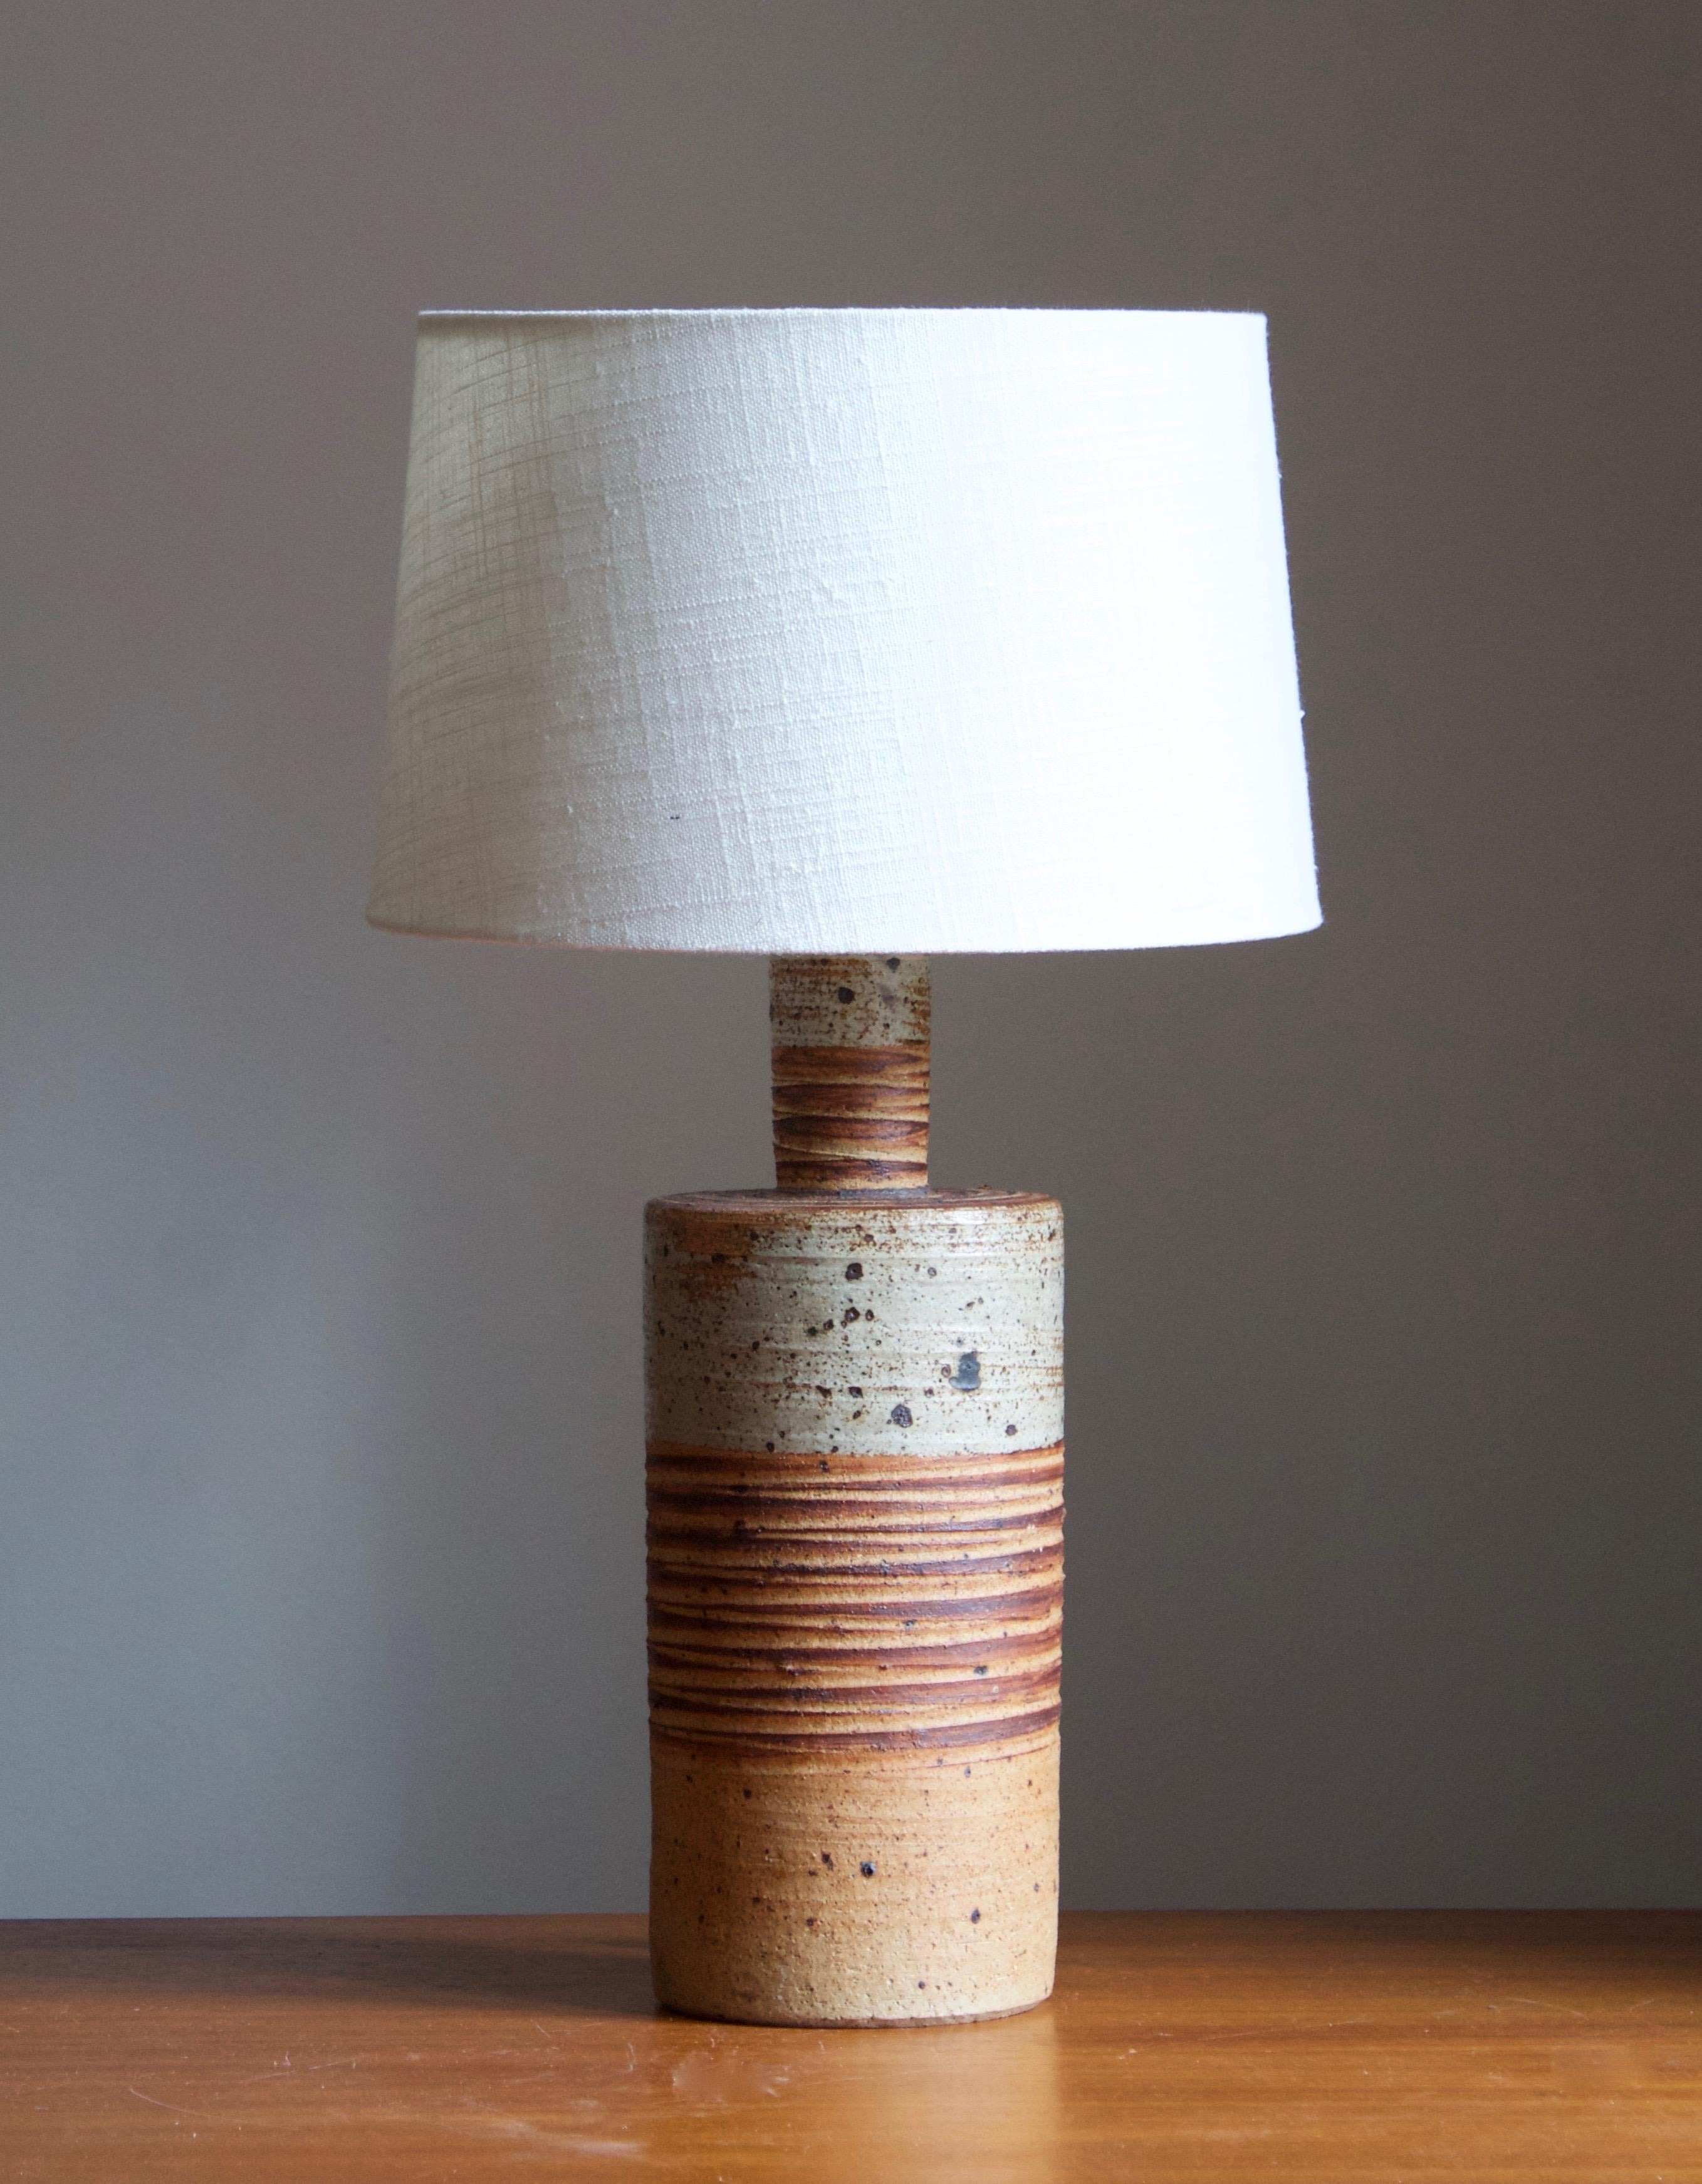 A table lamp. Produced and designed by Tue Poulsen, Denmark, 1960s. Underside of base signed.

Sold without lampshades. Stated dimensions exclude lampshade. Height includes socket.

Glaze features grey-brown colors.

Other designers of the period